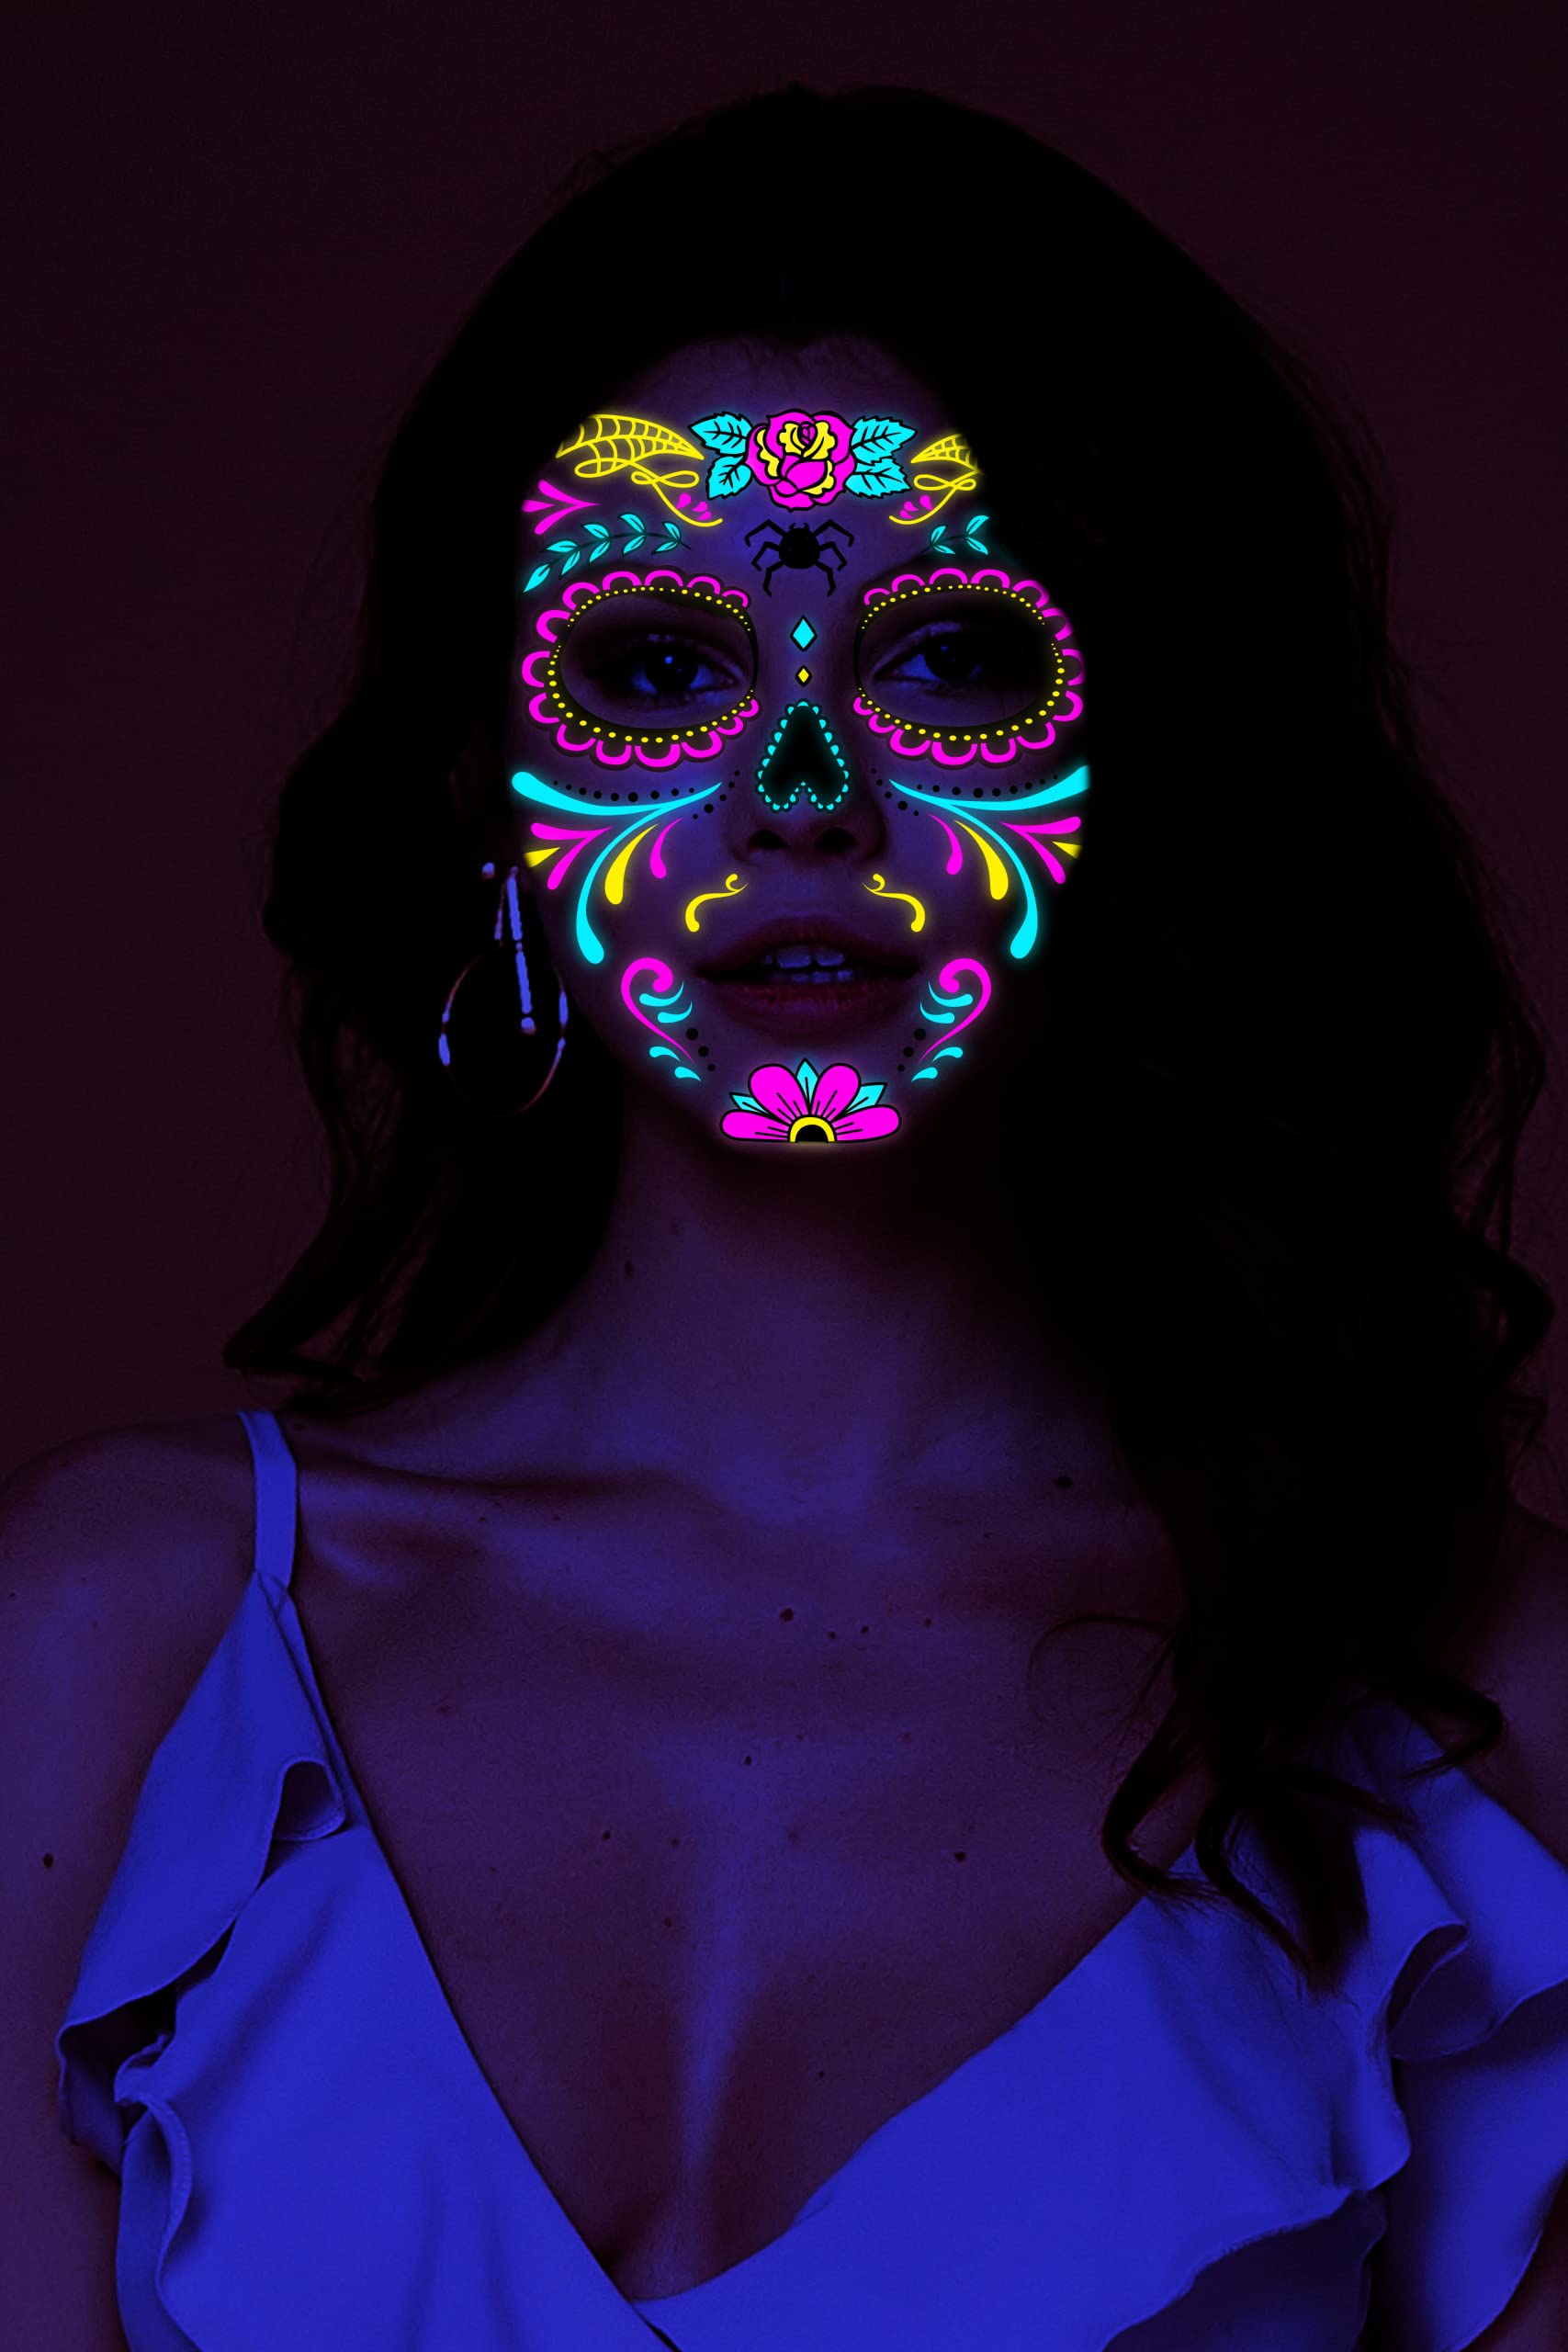 Beilingdun Halloween & Day of the Dead Sugar Skull Glowing Temporary Face Tattoos (8 Packs),Roses Spider Net and Floral Black Skeleton Web Red Roses Full Face Mask Tattoo for the halloween &Night Party